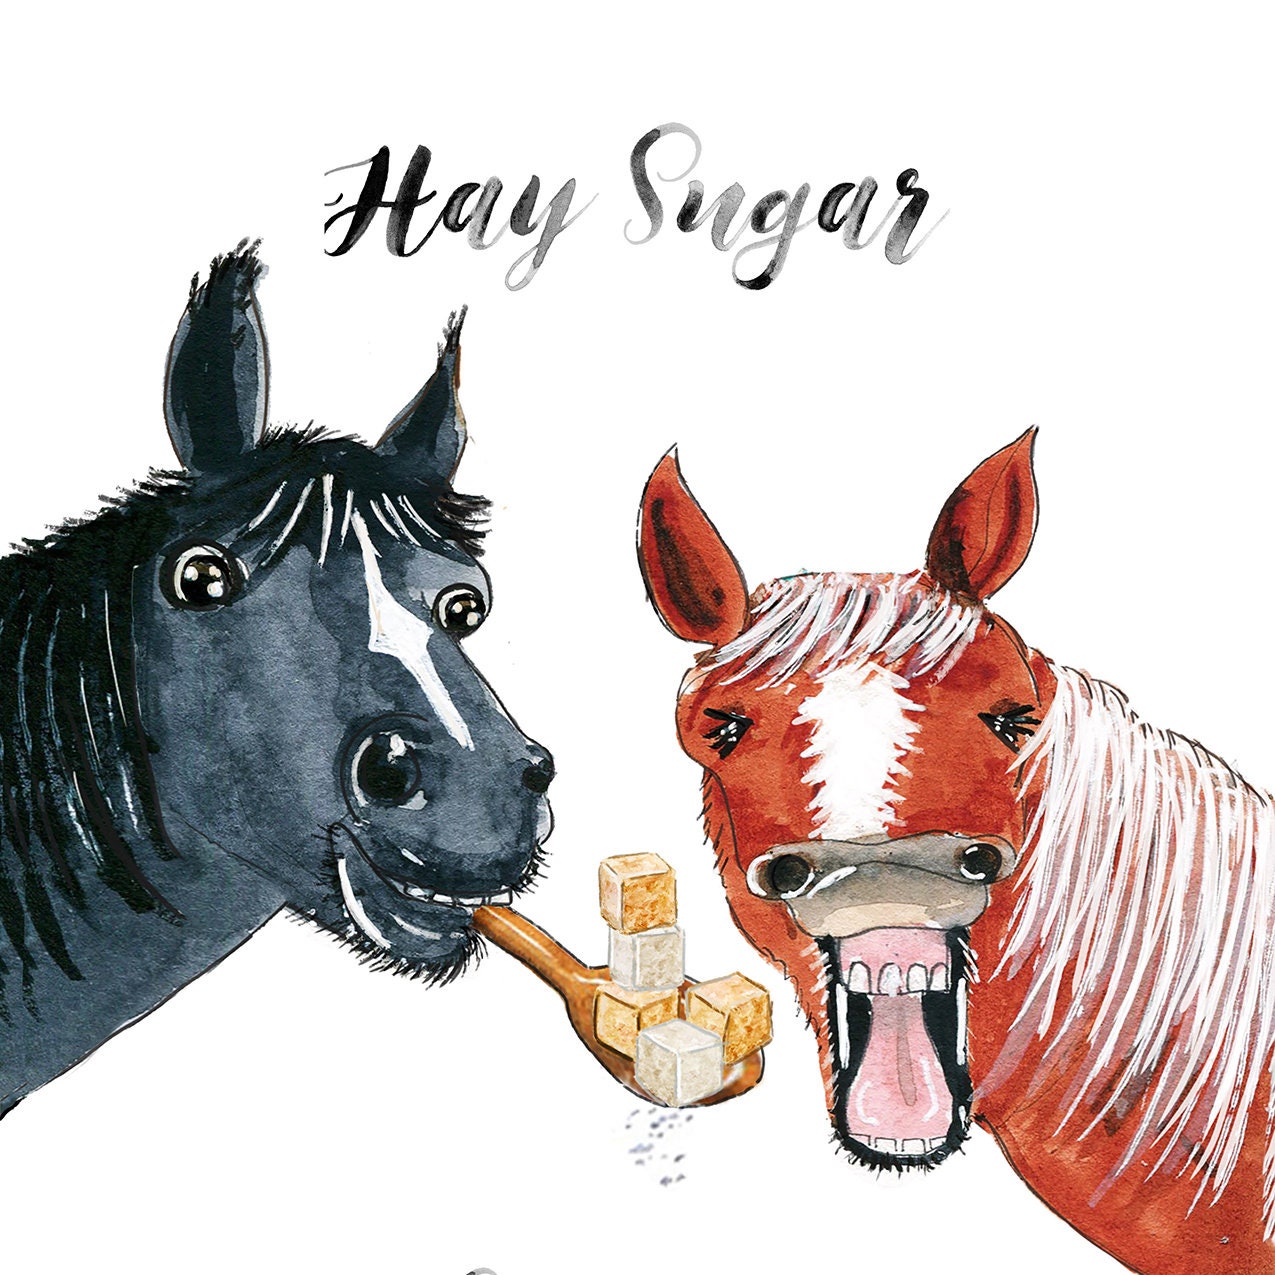 Horse Couple 6 Years Sugar Anniversary Card For Husband - Funny 6th Anniversary Cards For Him